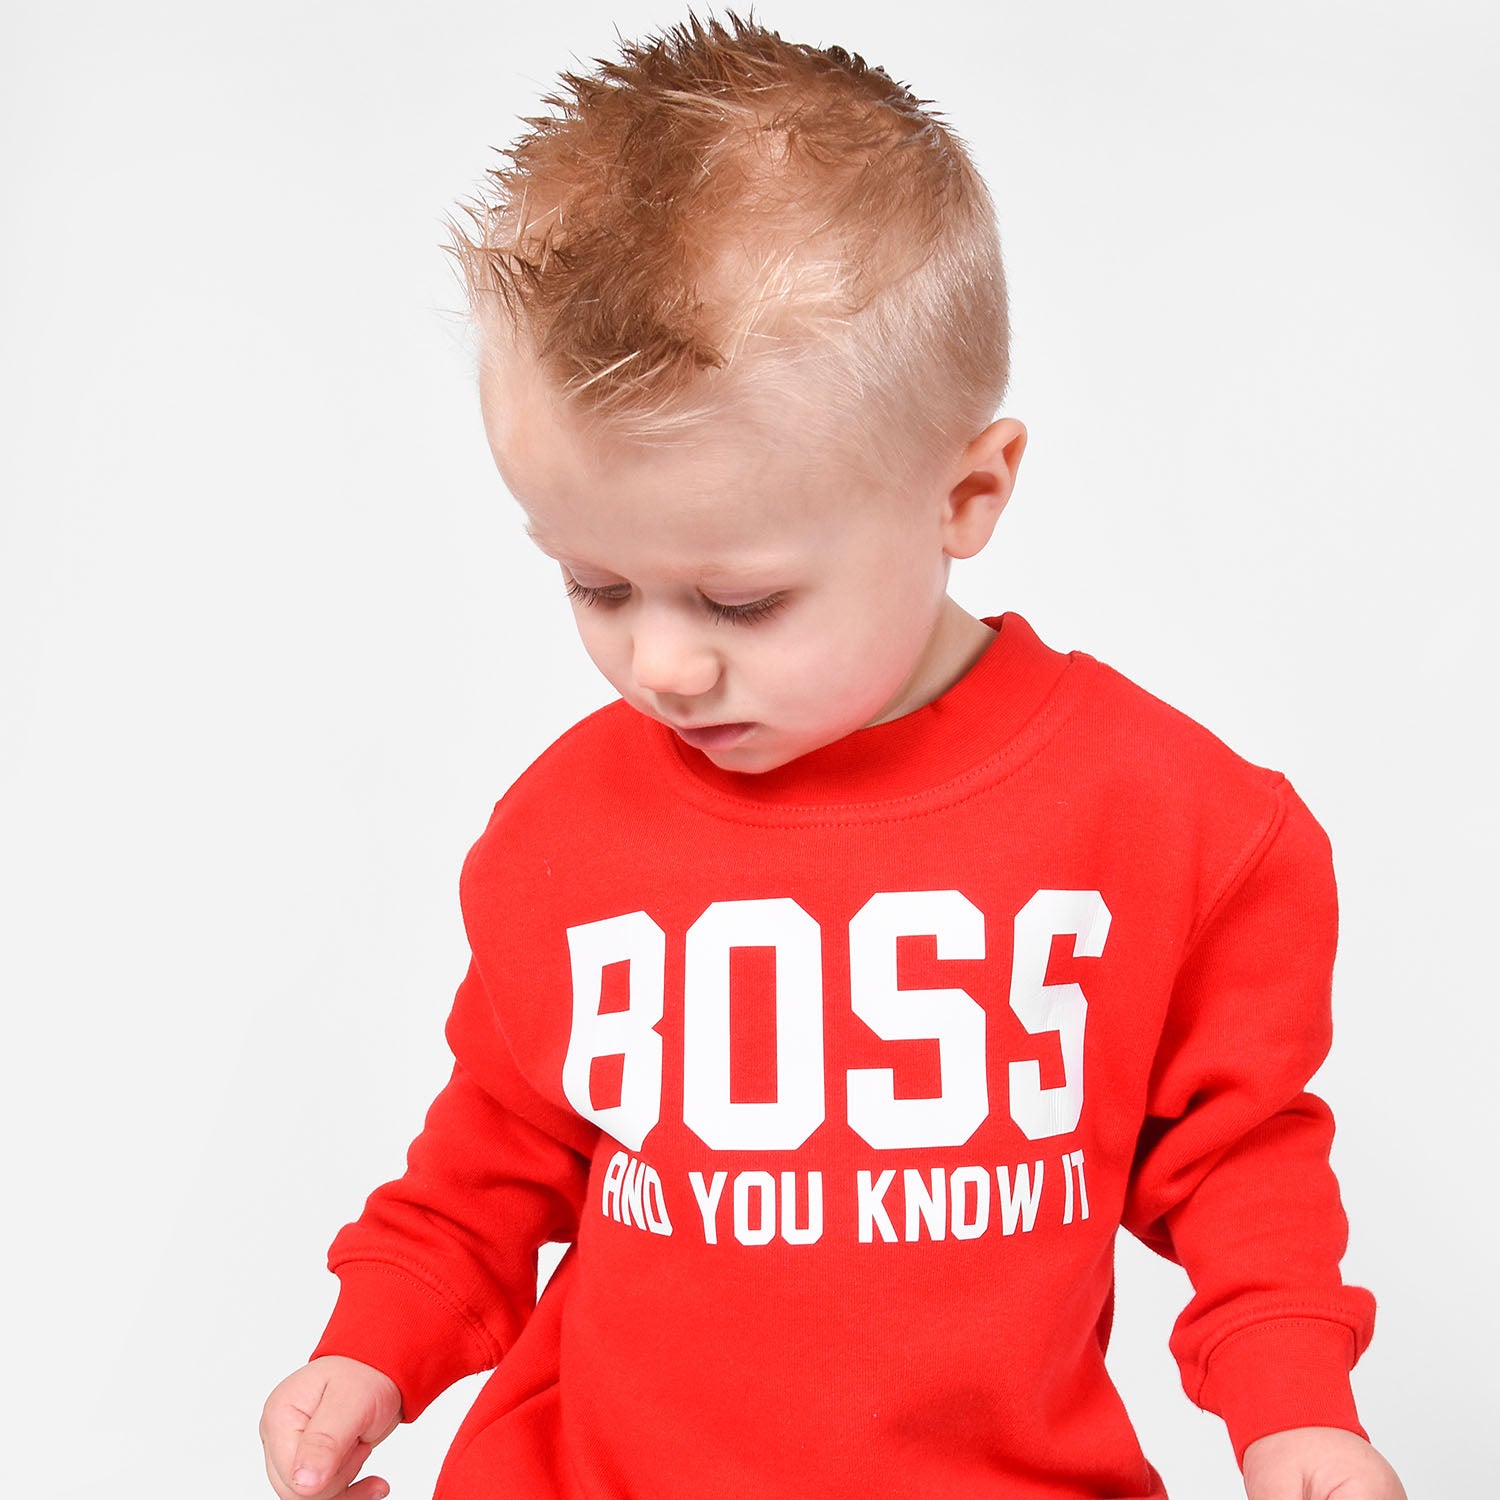 'Boss and you know it' kids sweater